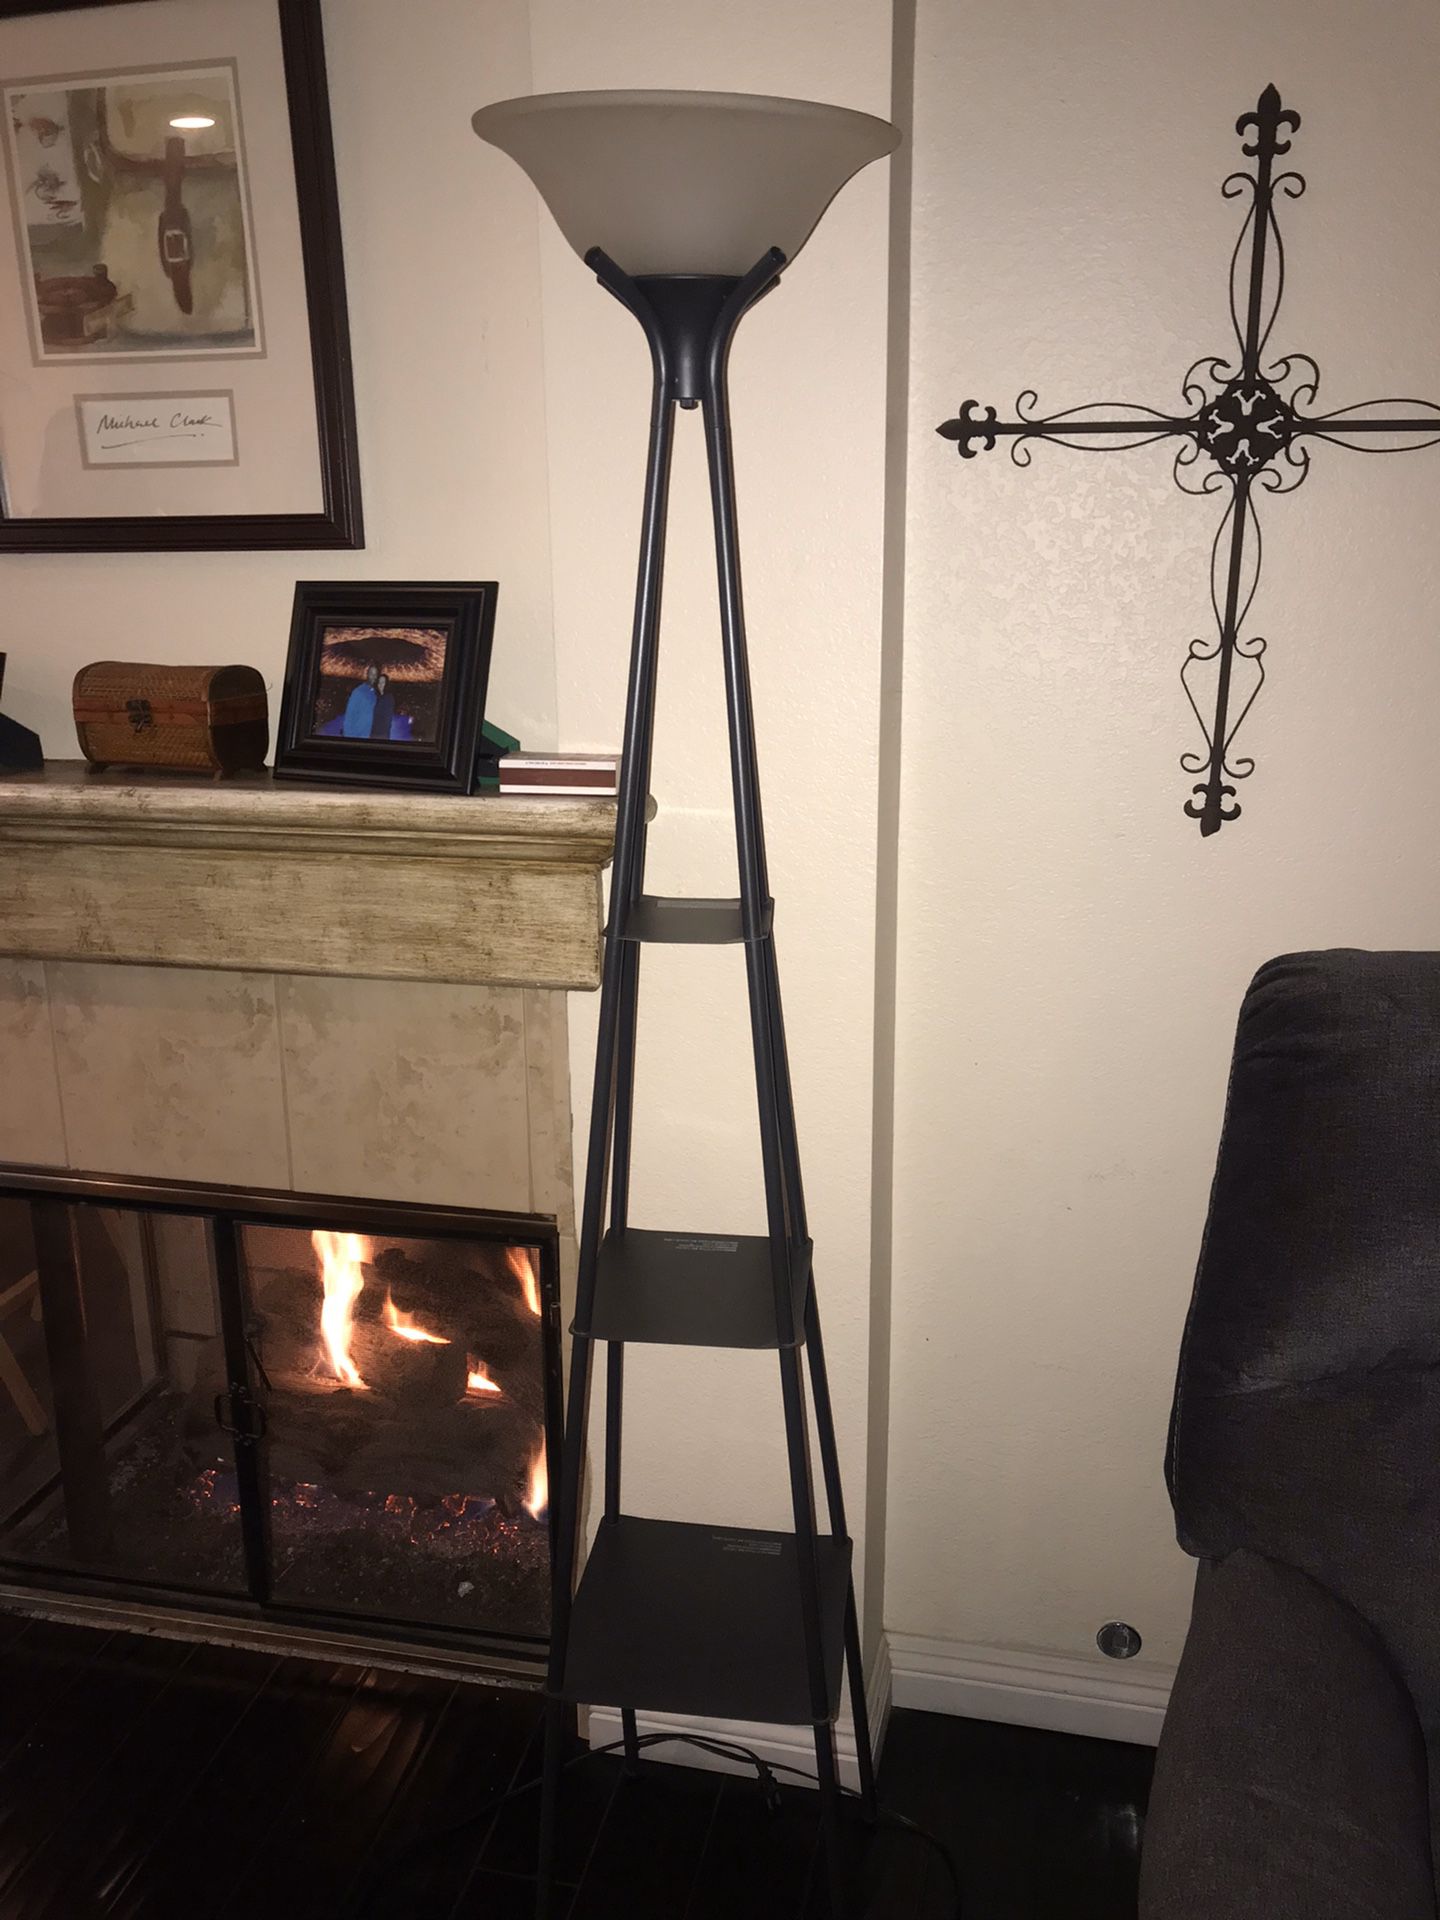 Two lamps for $100